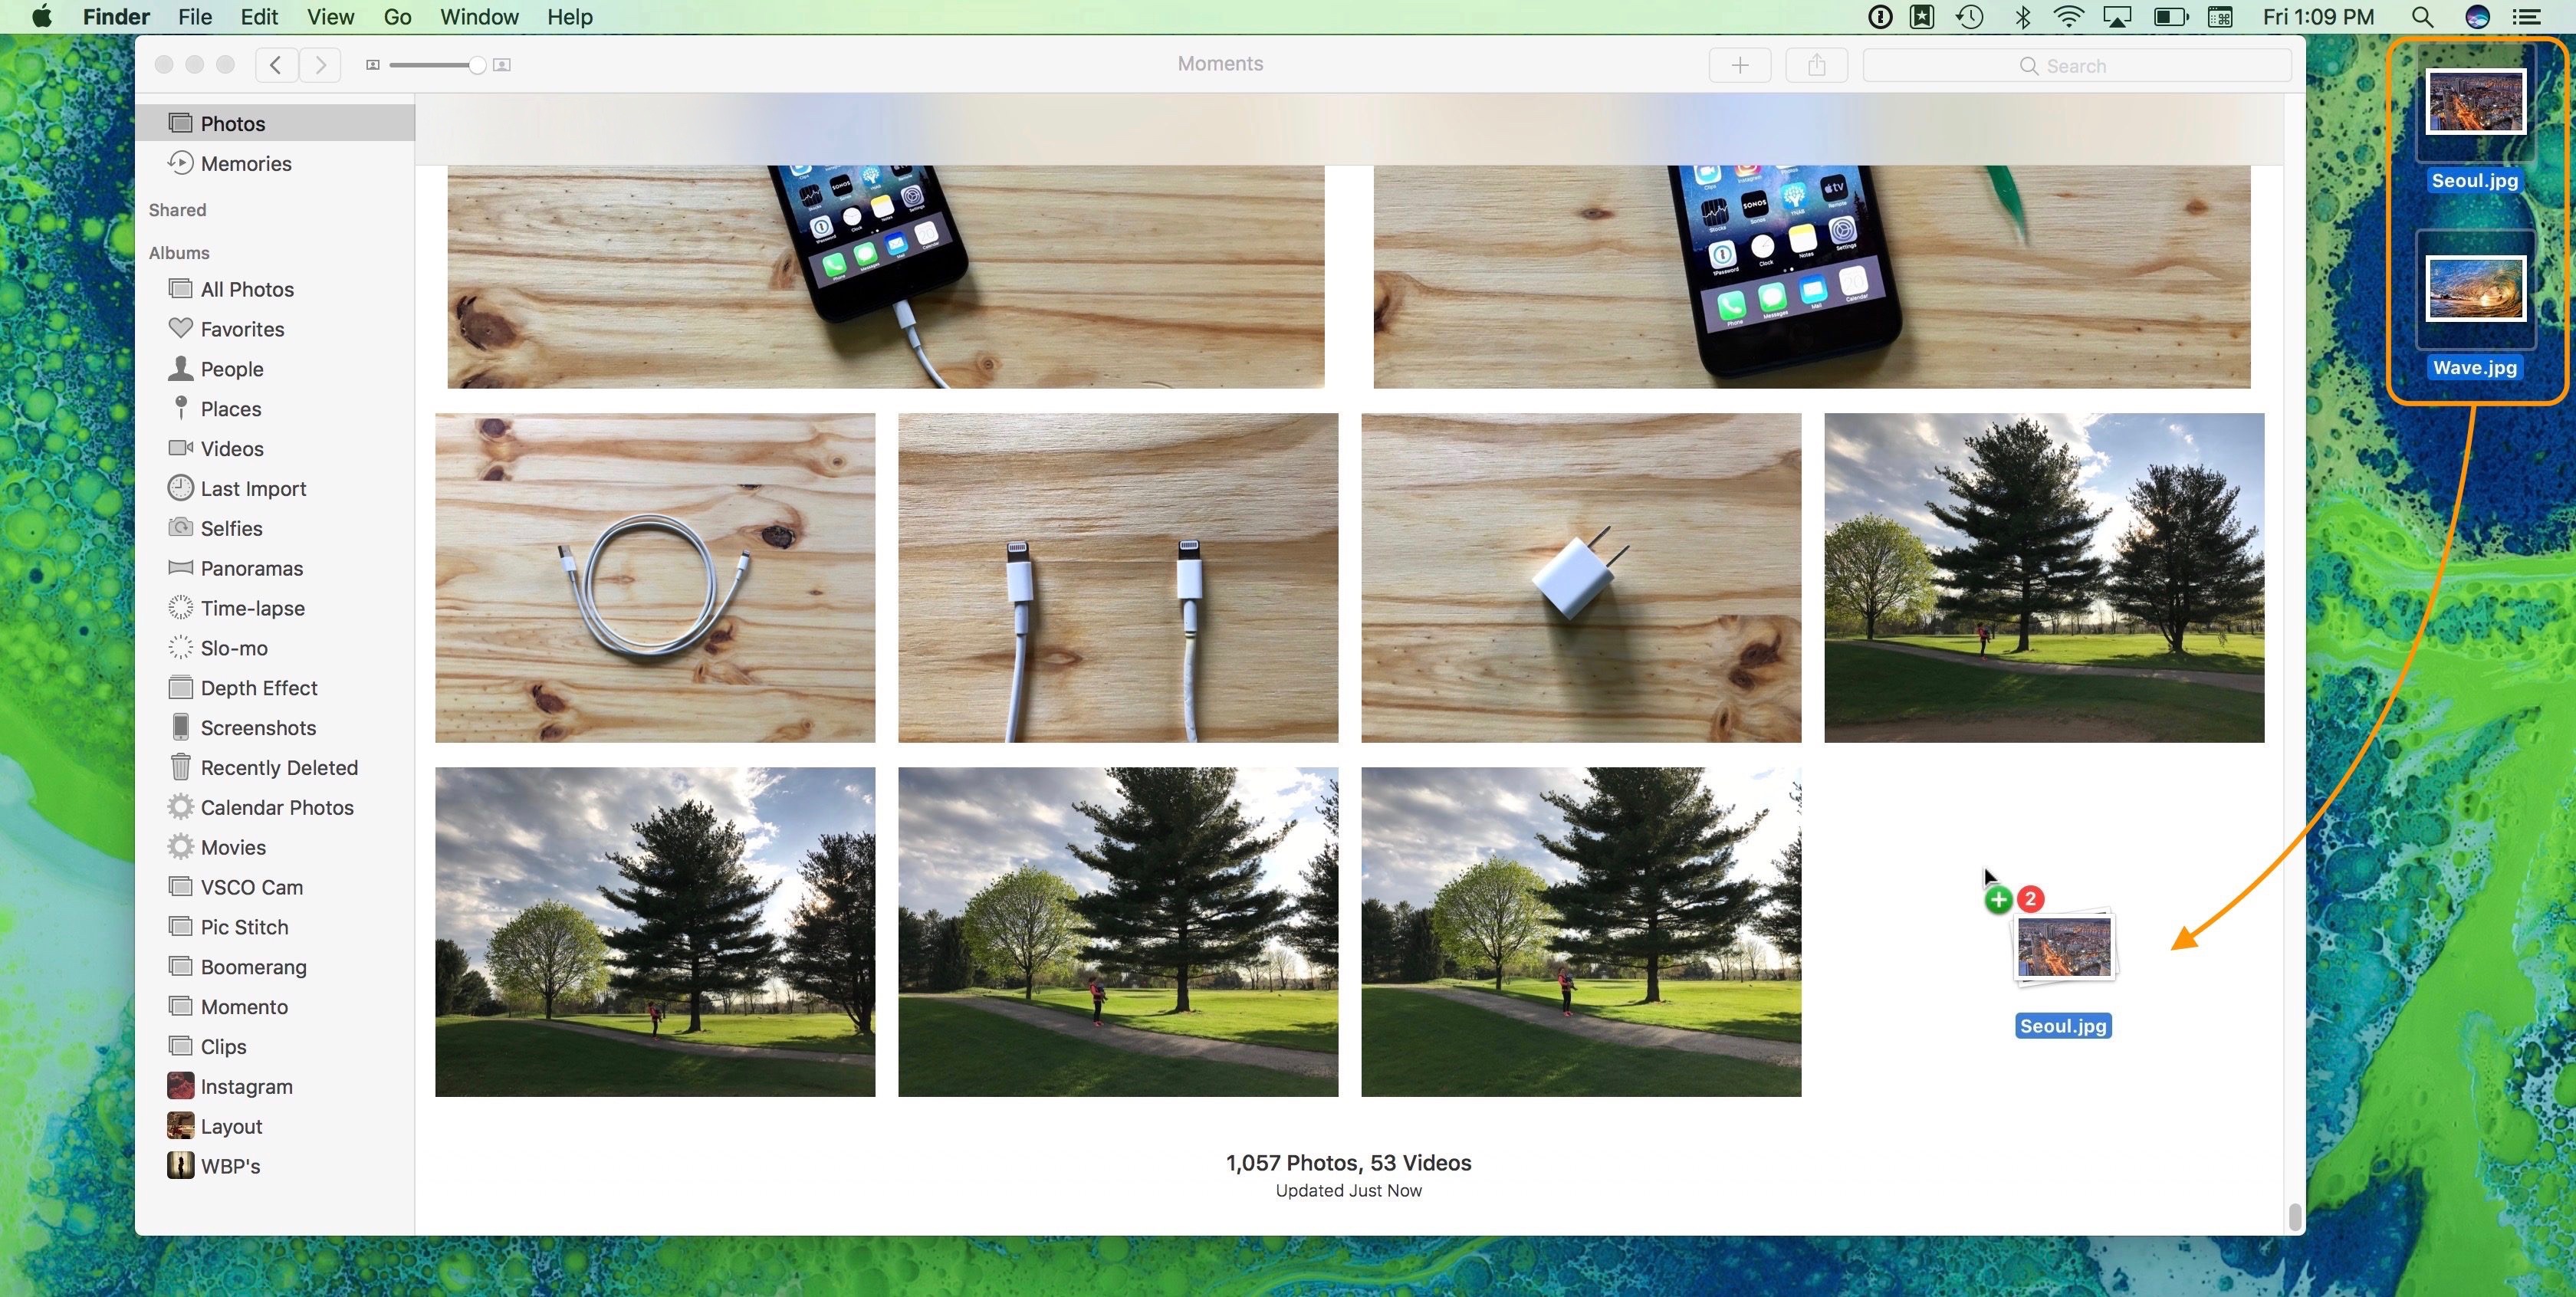 How to upload photos into iCloud Photos from iPhone, iPad, Mac, and